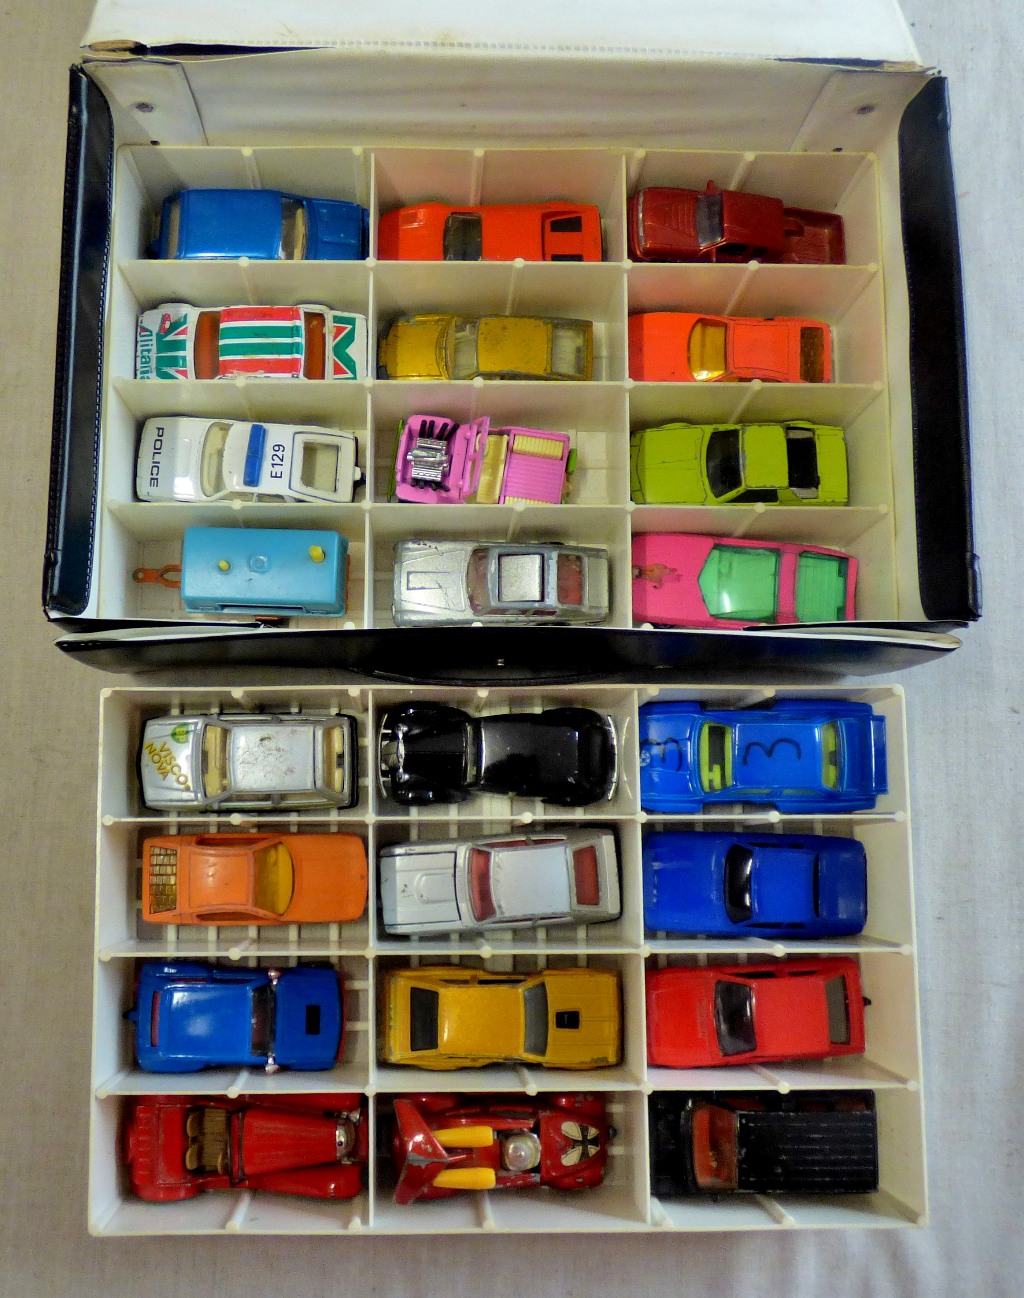 Corgi, Matchbox, etc-collection of (24) mostly racing cars housed in a Mattel Race Case-Play worn